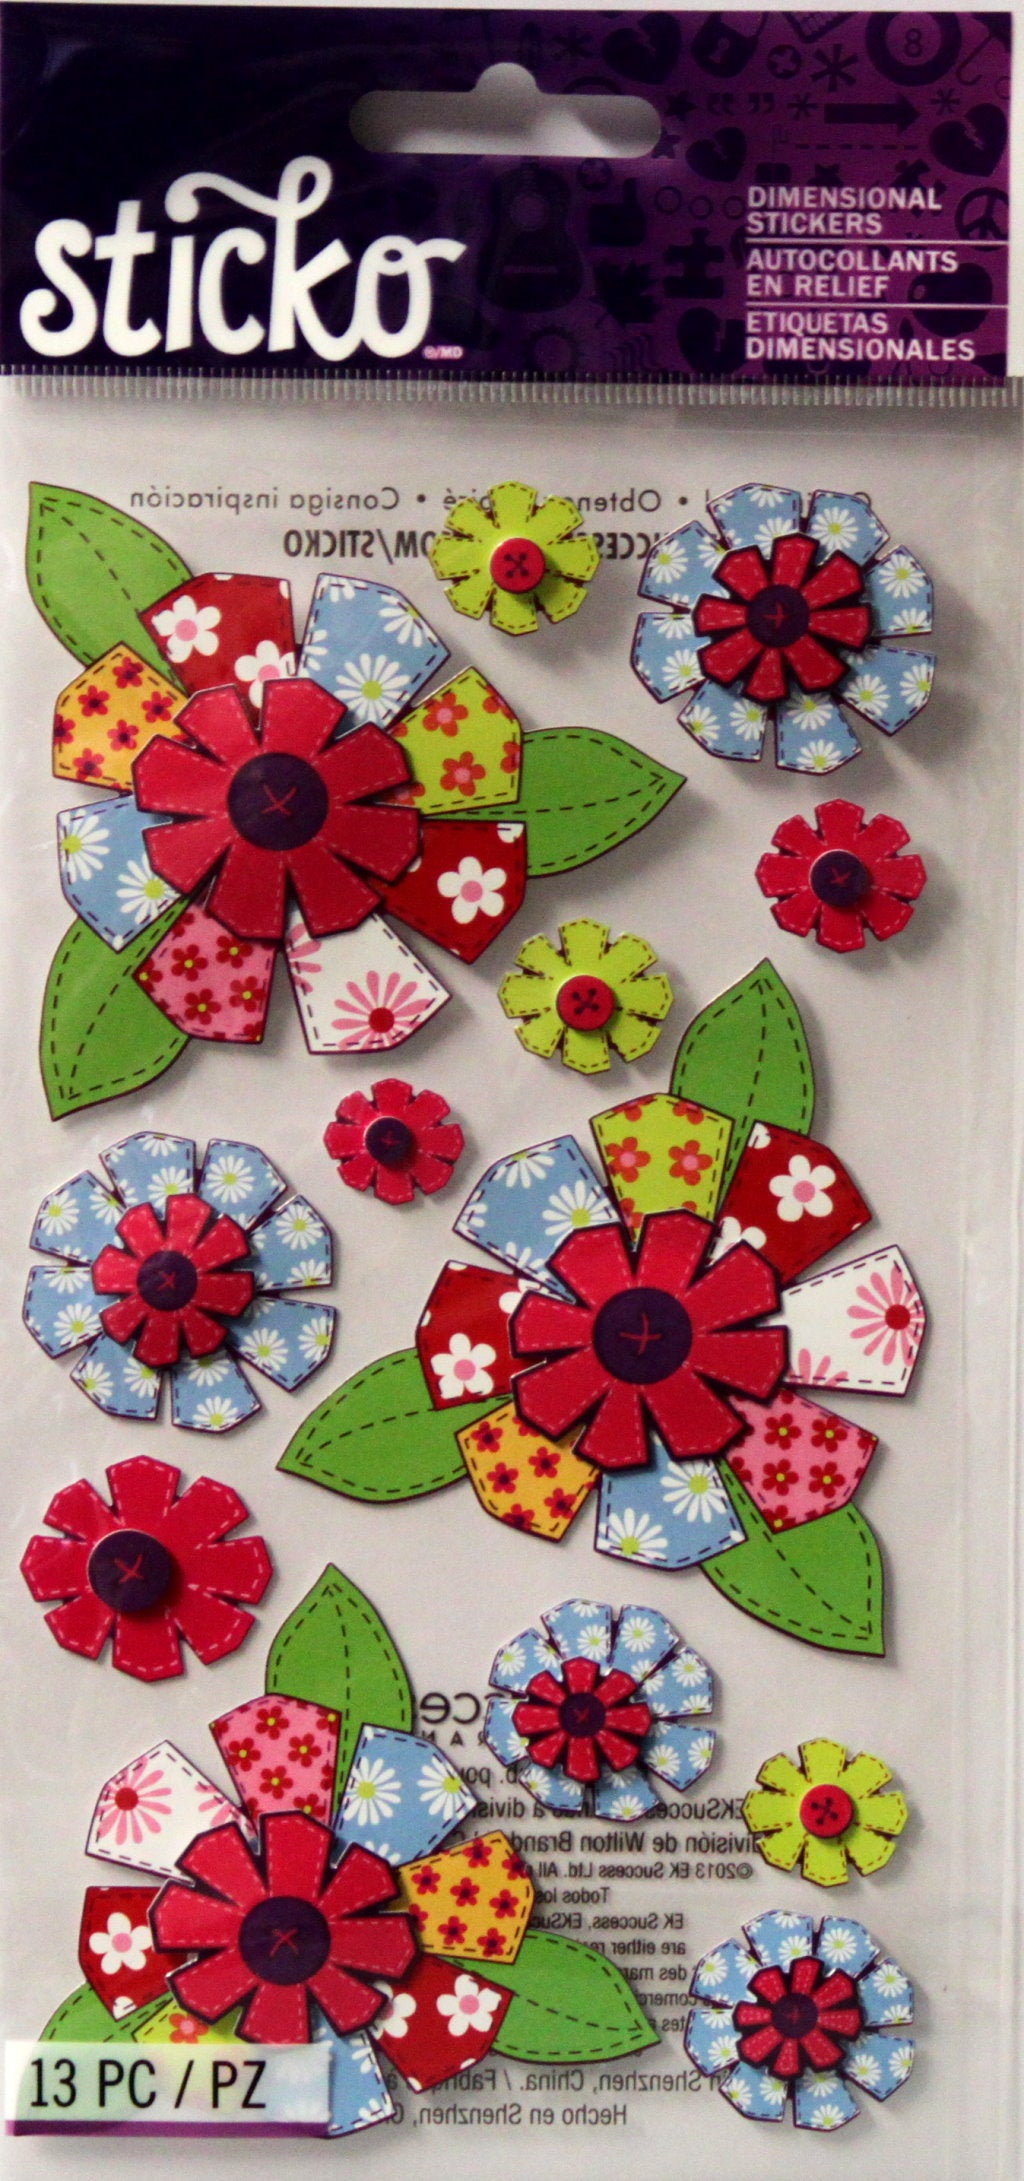 Sticko Patterned Flowers Dimensional Stickers